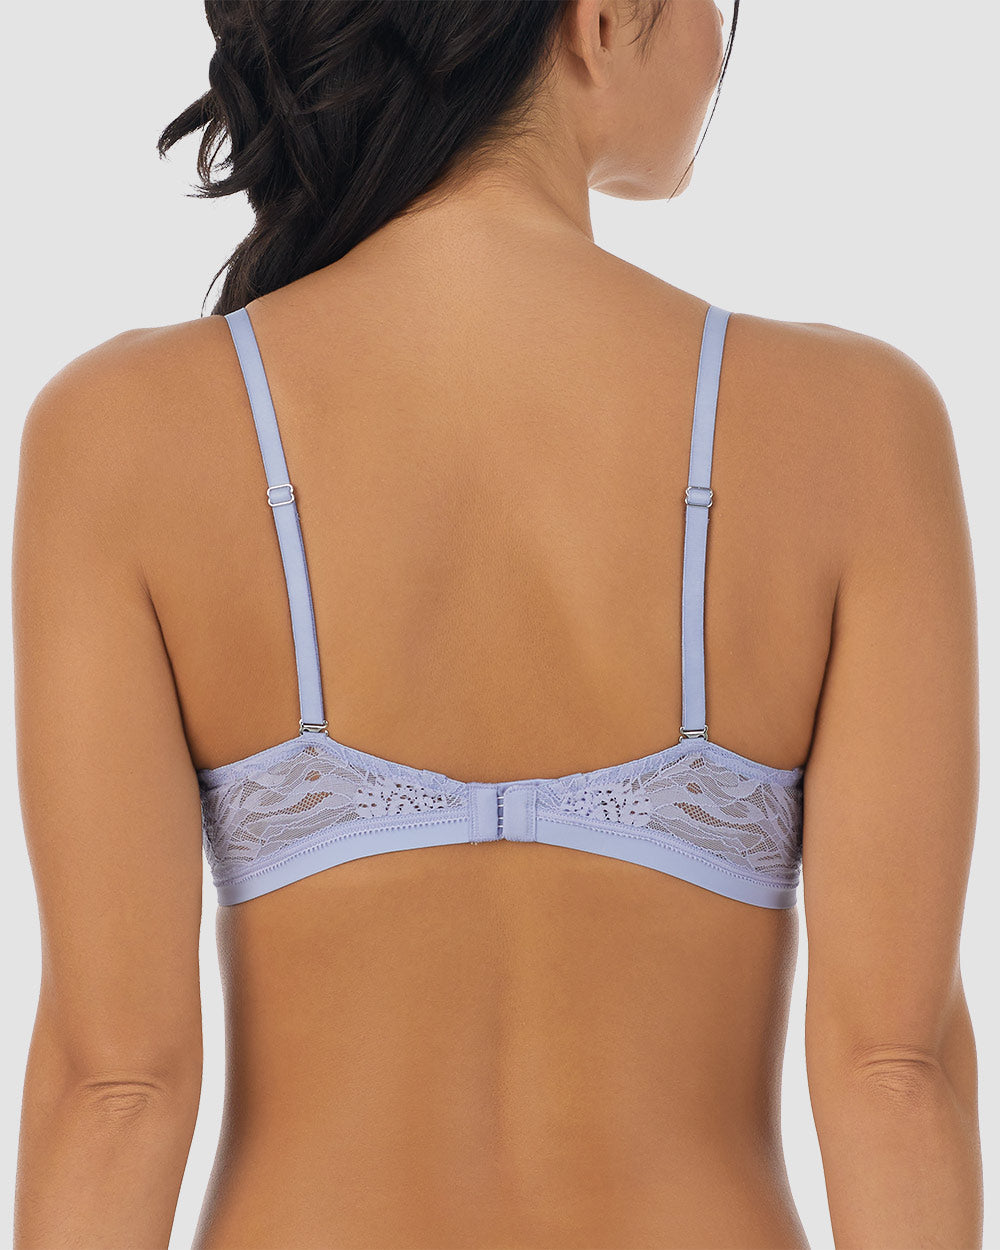 A lady wearing baby lavender Sleek Micro Push Up Bra With Lace